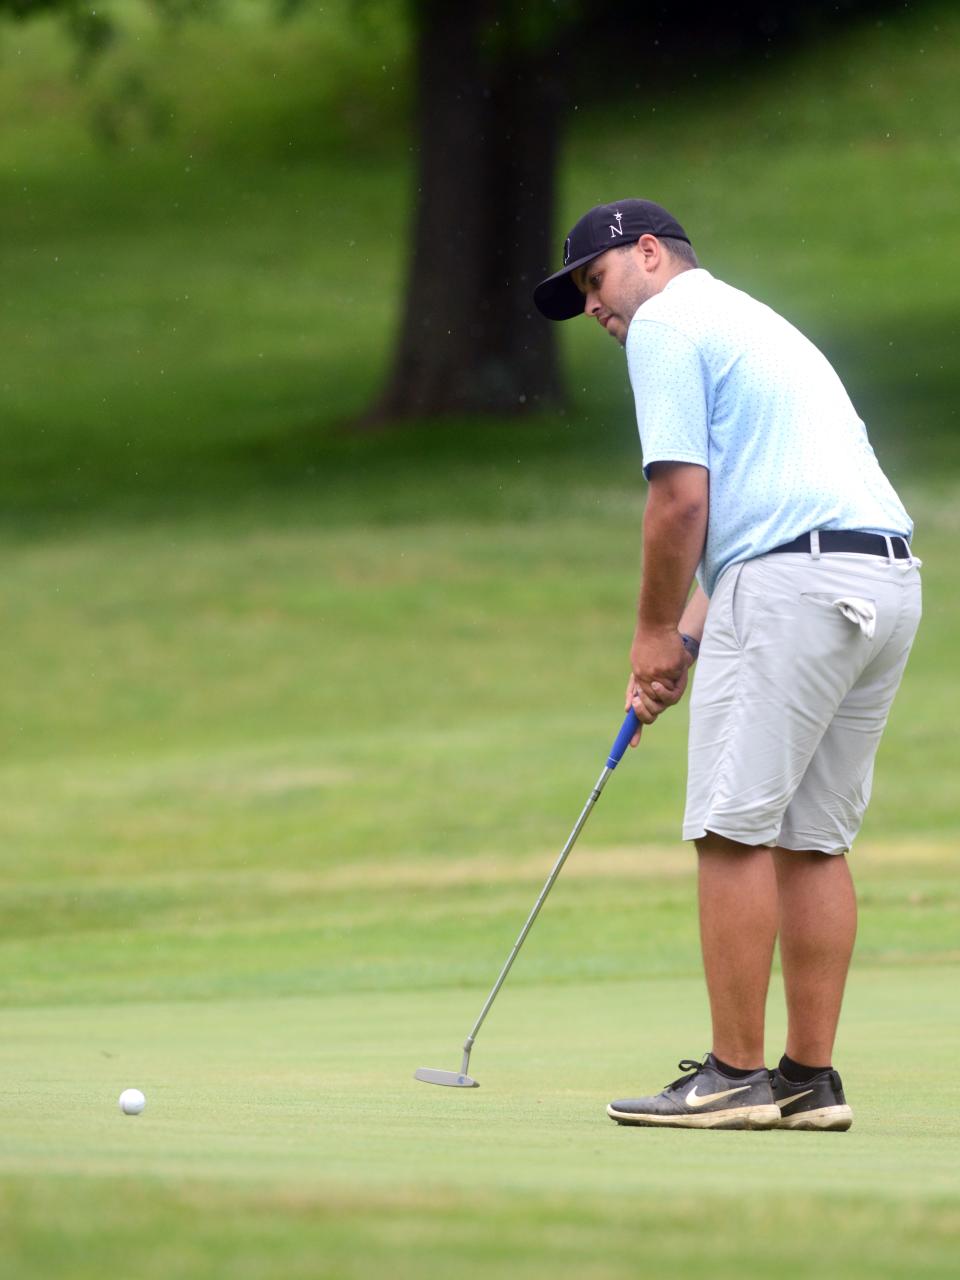 Michael Rozsa, a 2014 Tri-Valley grad, hits his eagle putt on the par-5 18th hole during the second round of the Zanesville District Golf Association Amateur tournament on Sunday at Jaycees. Rozsa shot 72 and is six shots back of the lead entreing the final round on June 18 at Zanesville Country Club.